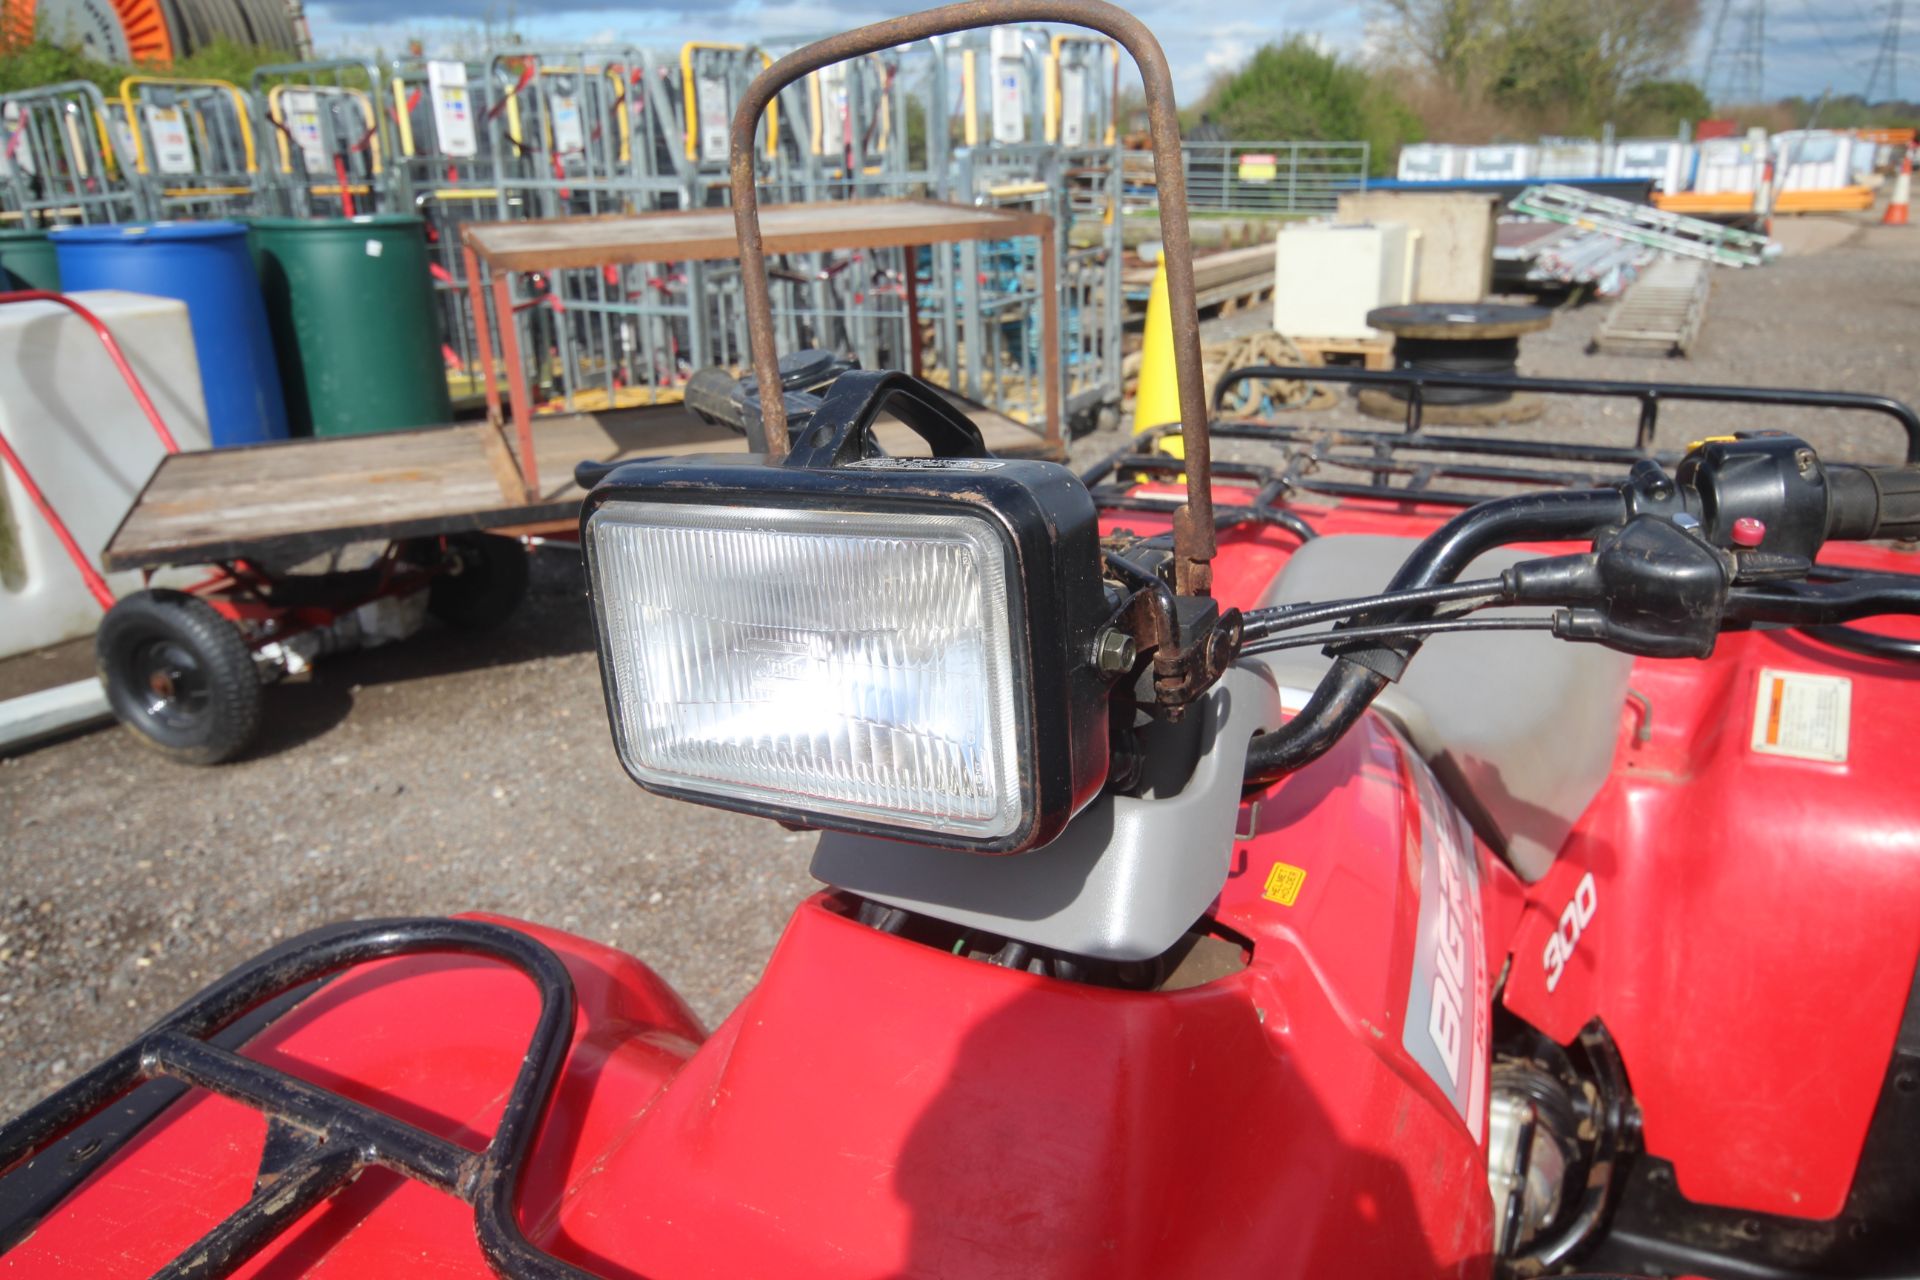 Honda Big Red 300 2WD quad bike. 1992. Owned from new. Key held. V - Image 5 of 24